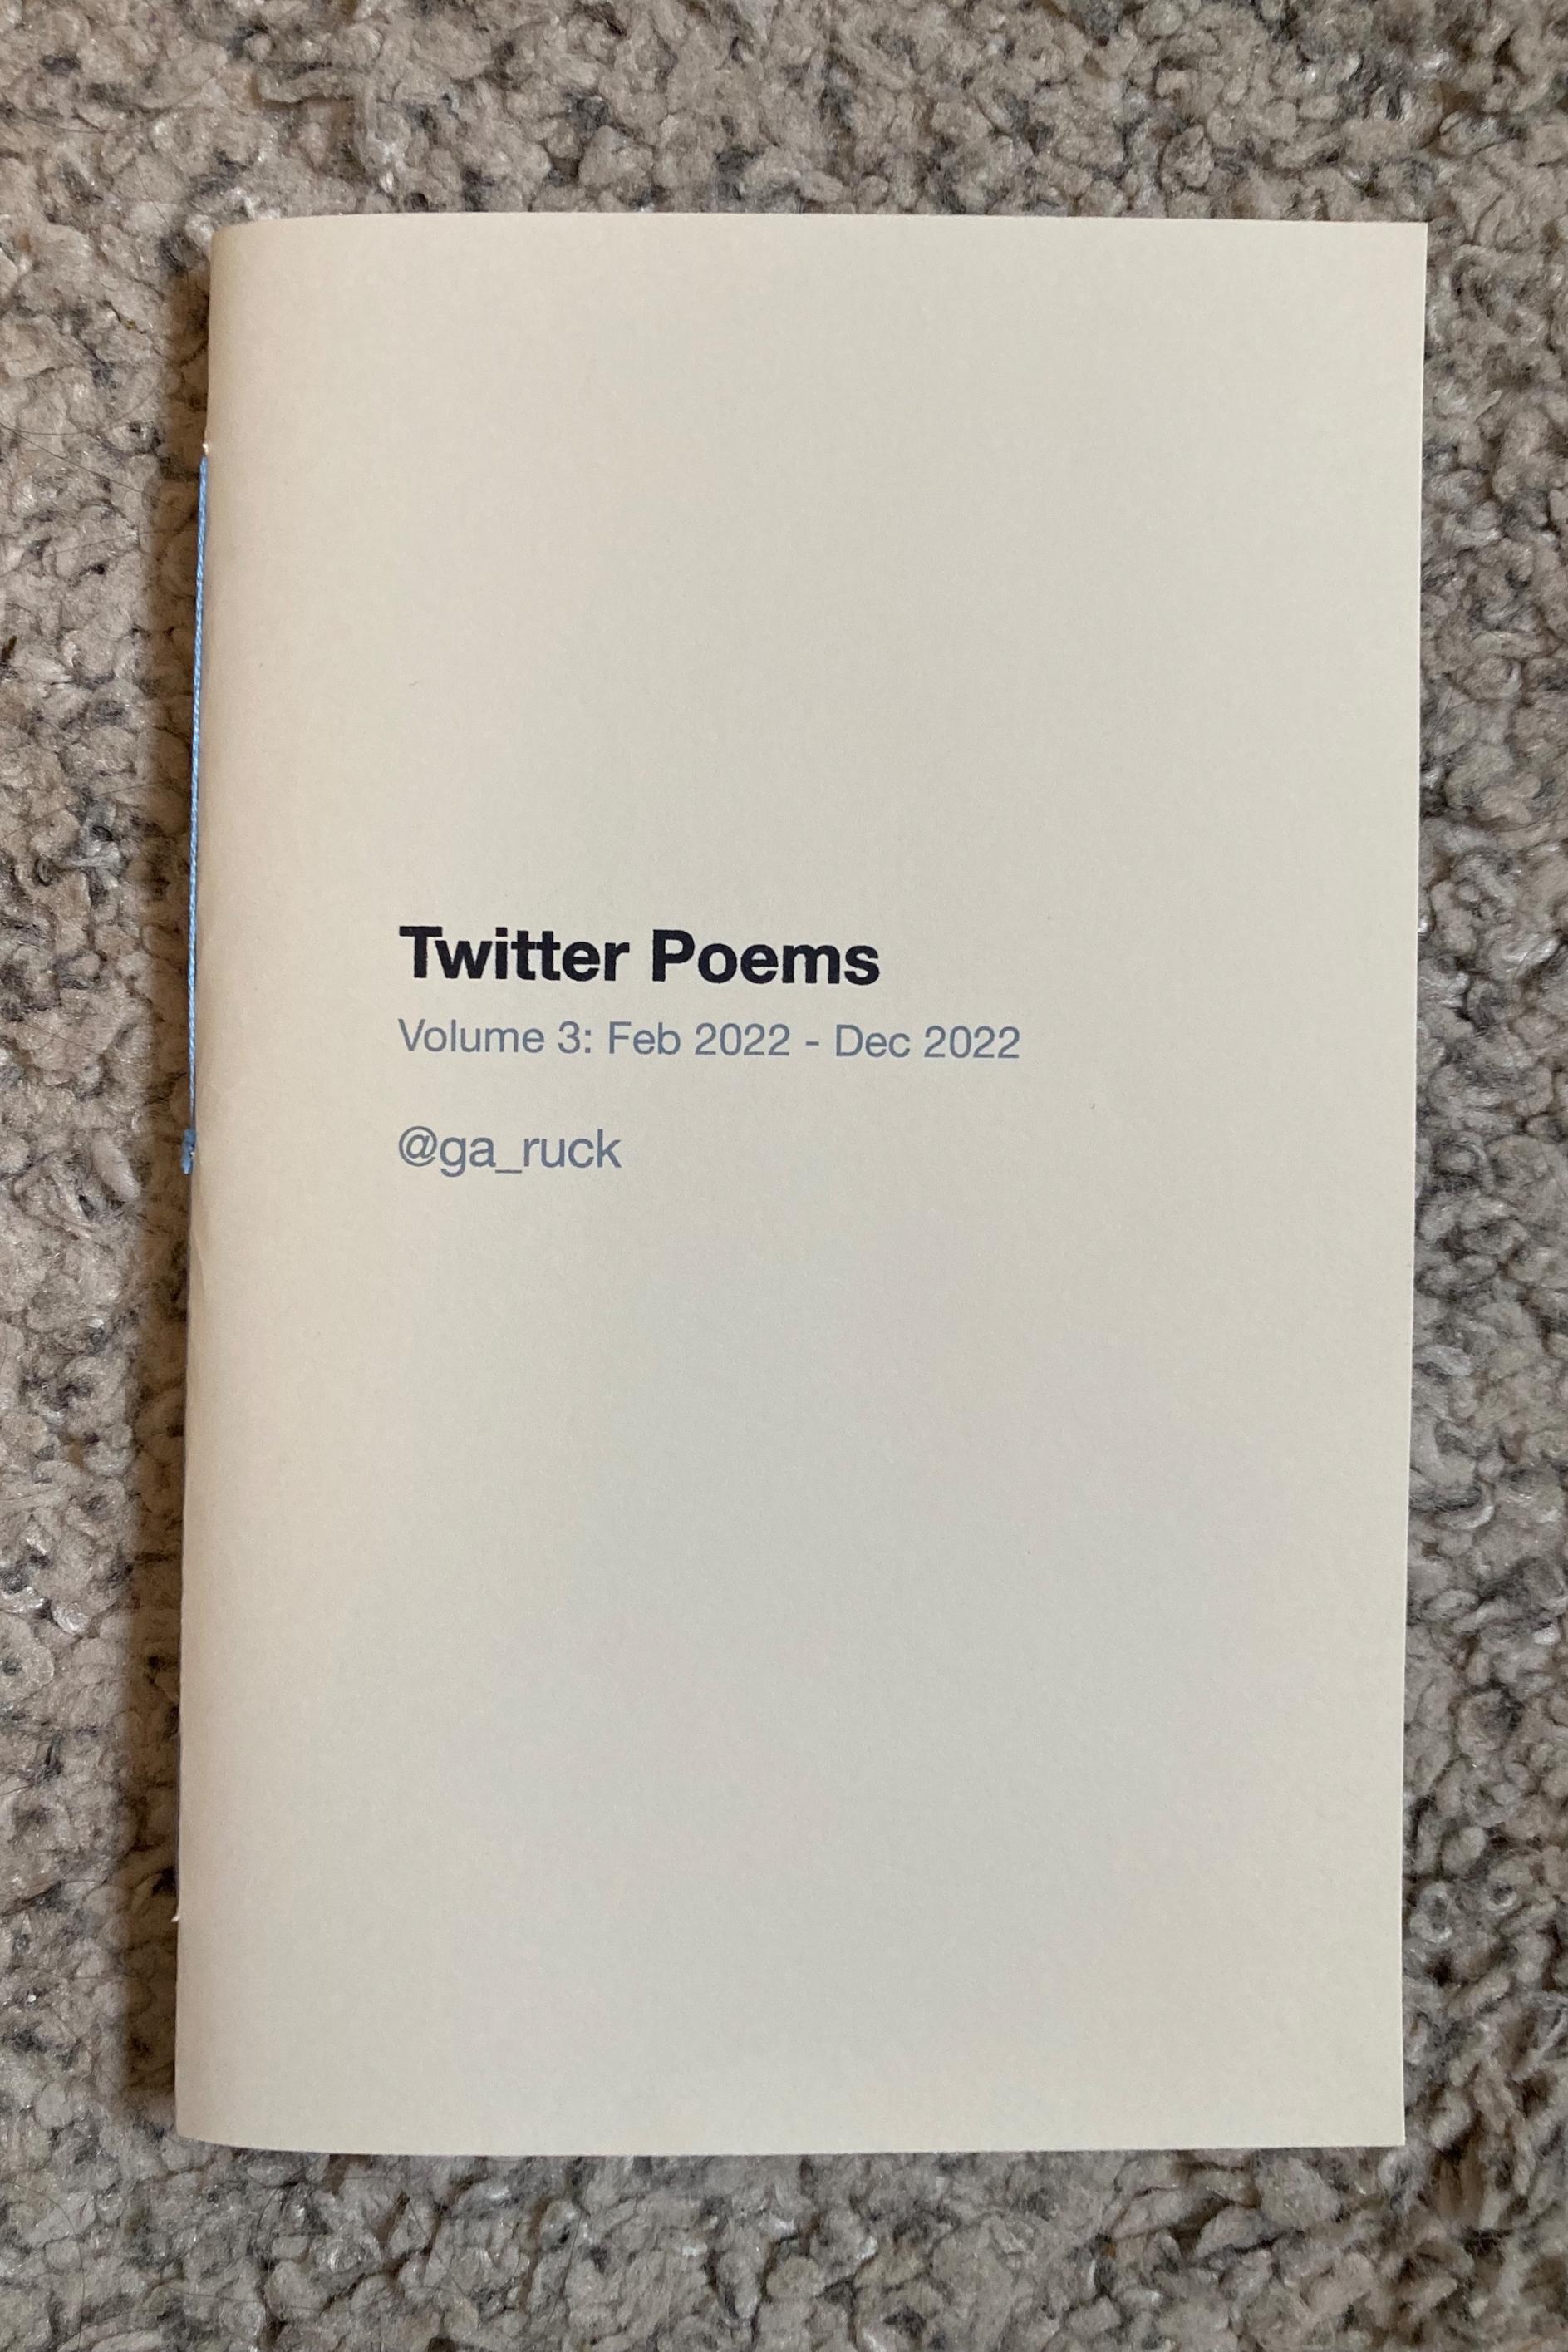 Book cover of Twitter Poems Volume 3: Feb 2022 - Dec 2022 by Graeme Ruck